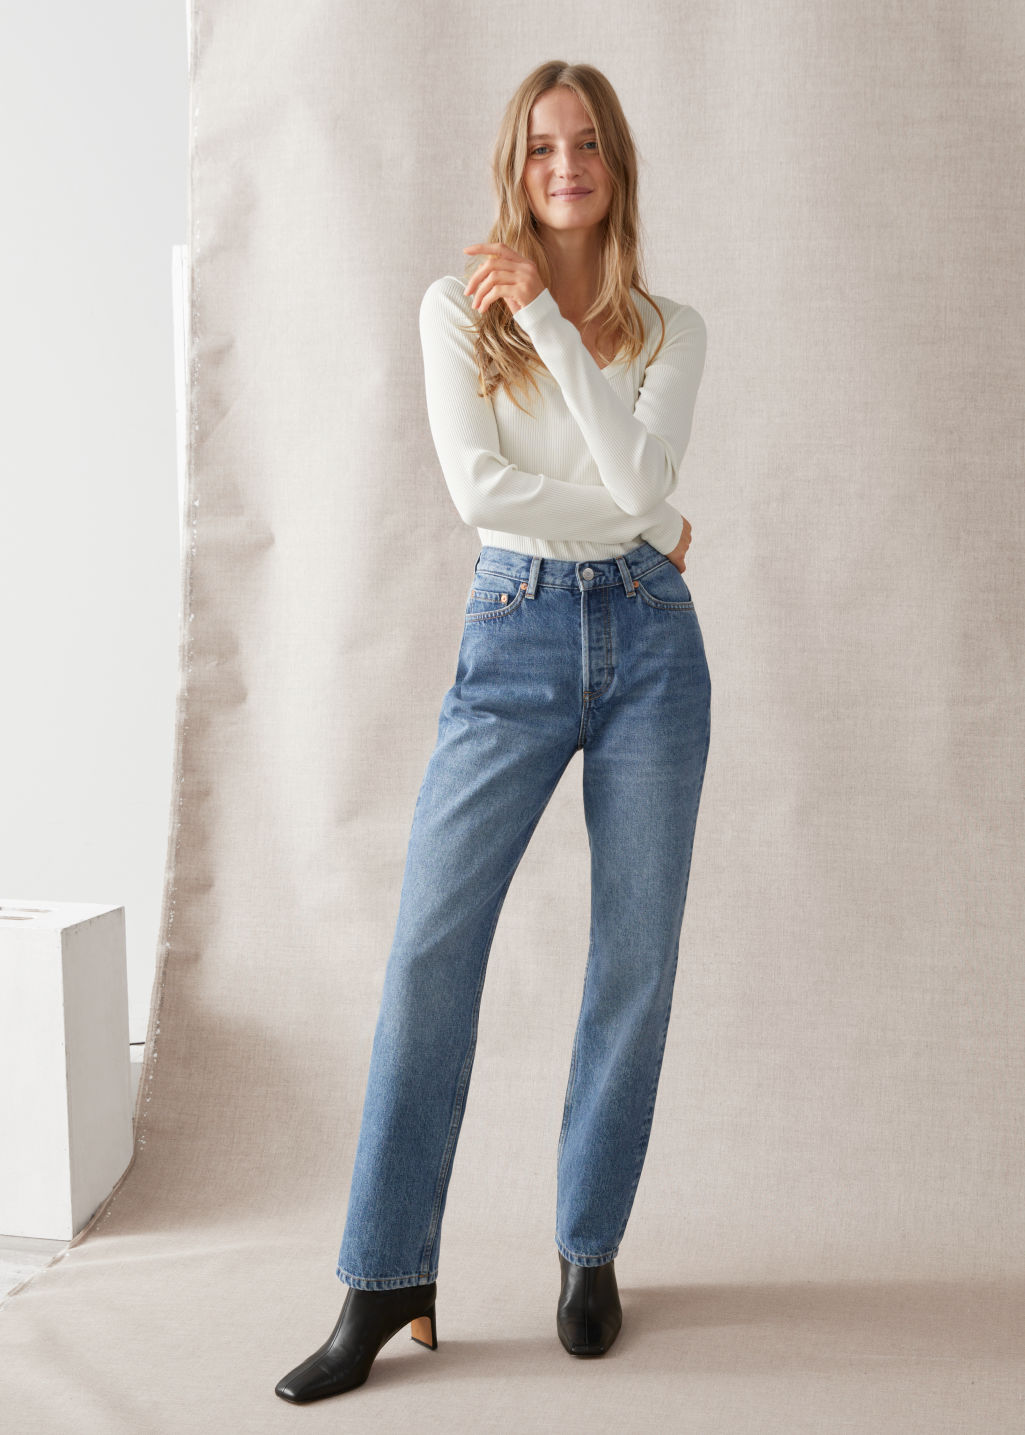 Keeper Cut Jeans - Dusty Blue - Straight - & Other Stories